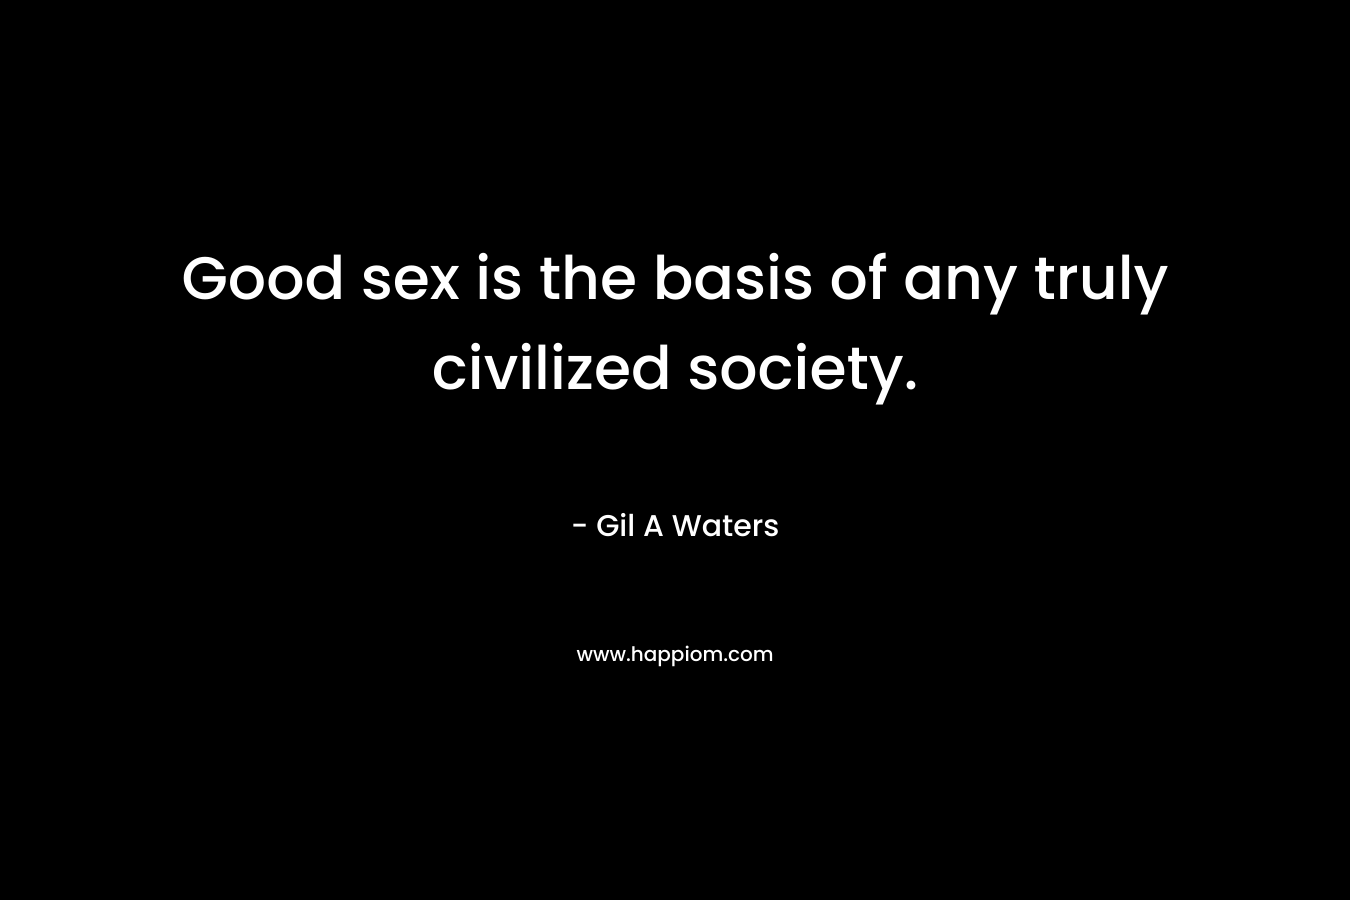 Good sex is the basis of any truly civilized society. – Gil A Waters